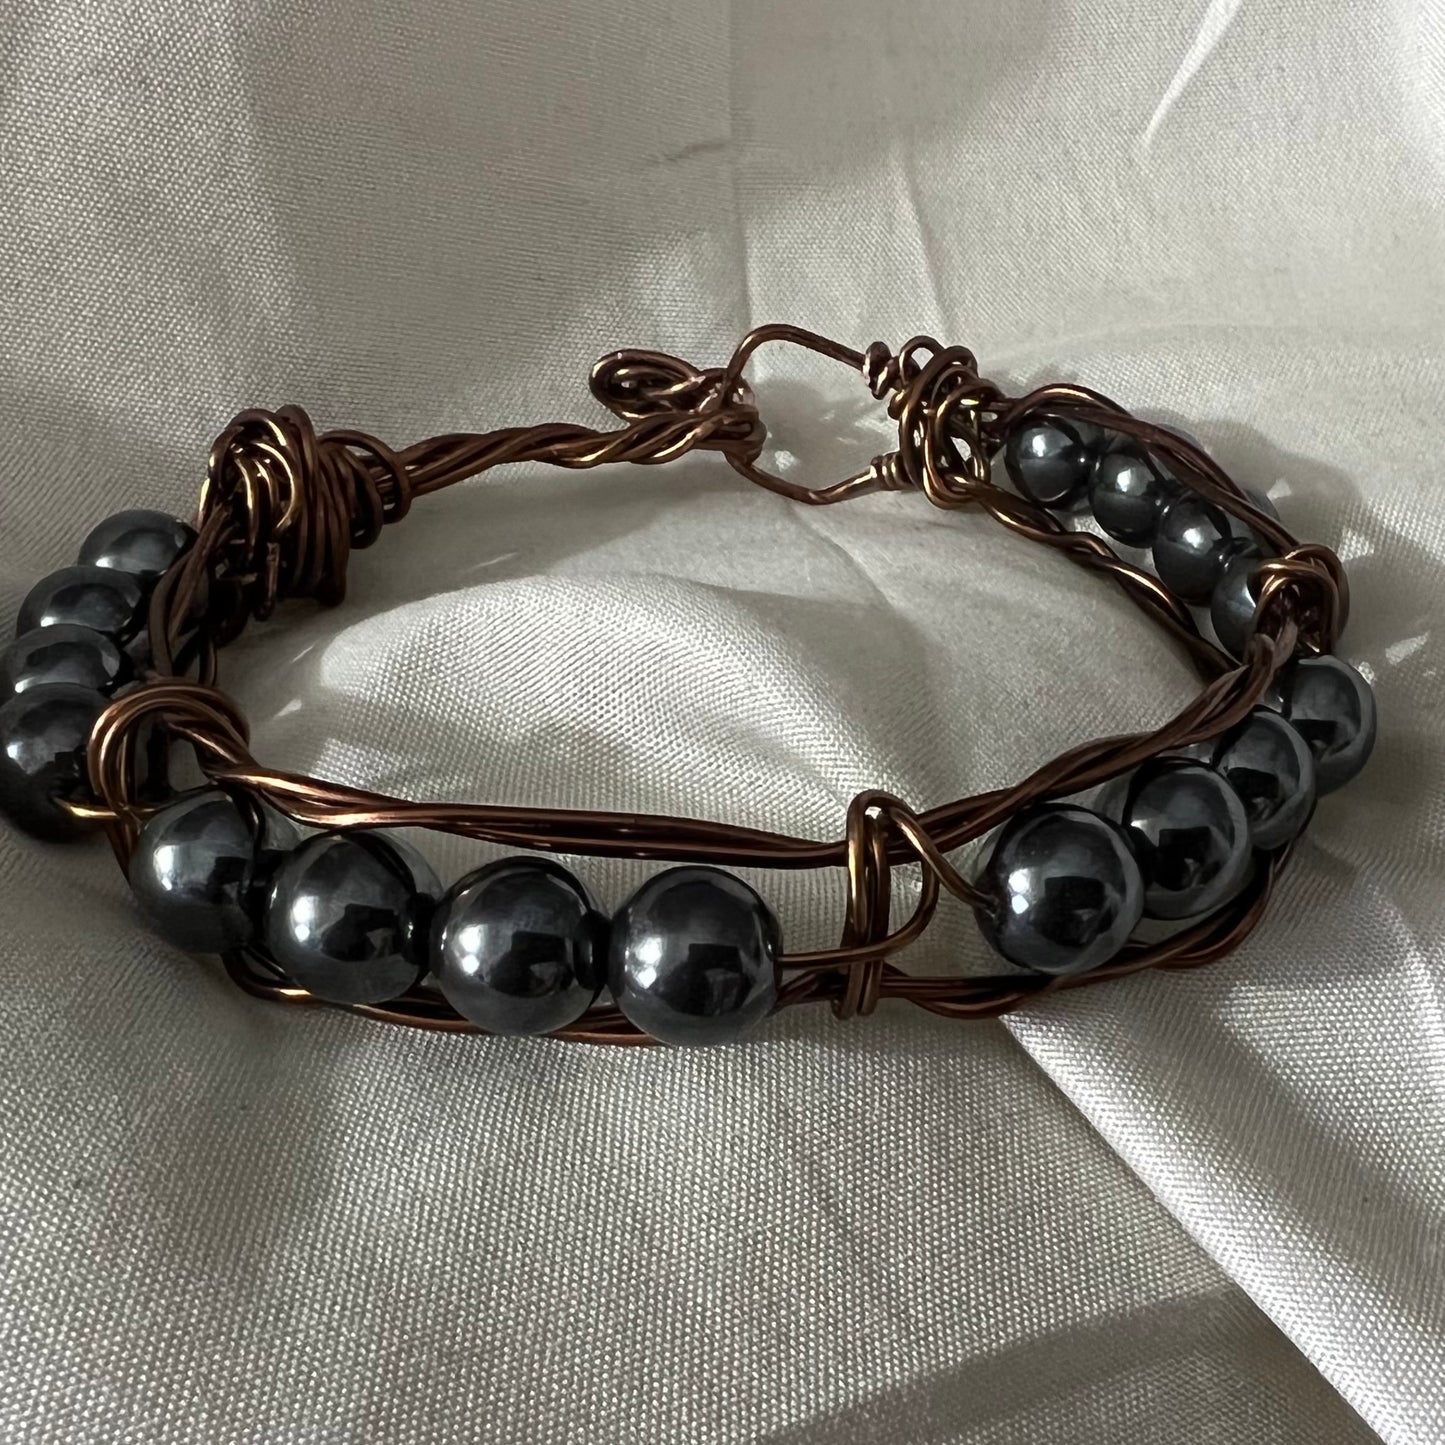 Hematite men’s bracelet- to restore, strengthen and regulate blood supply. Great for anxiety